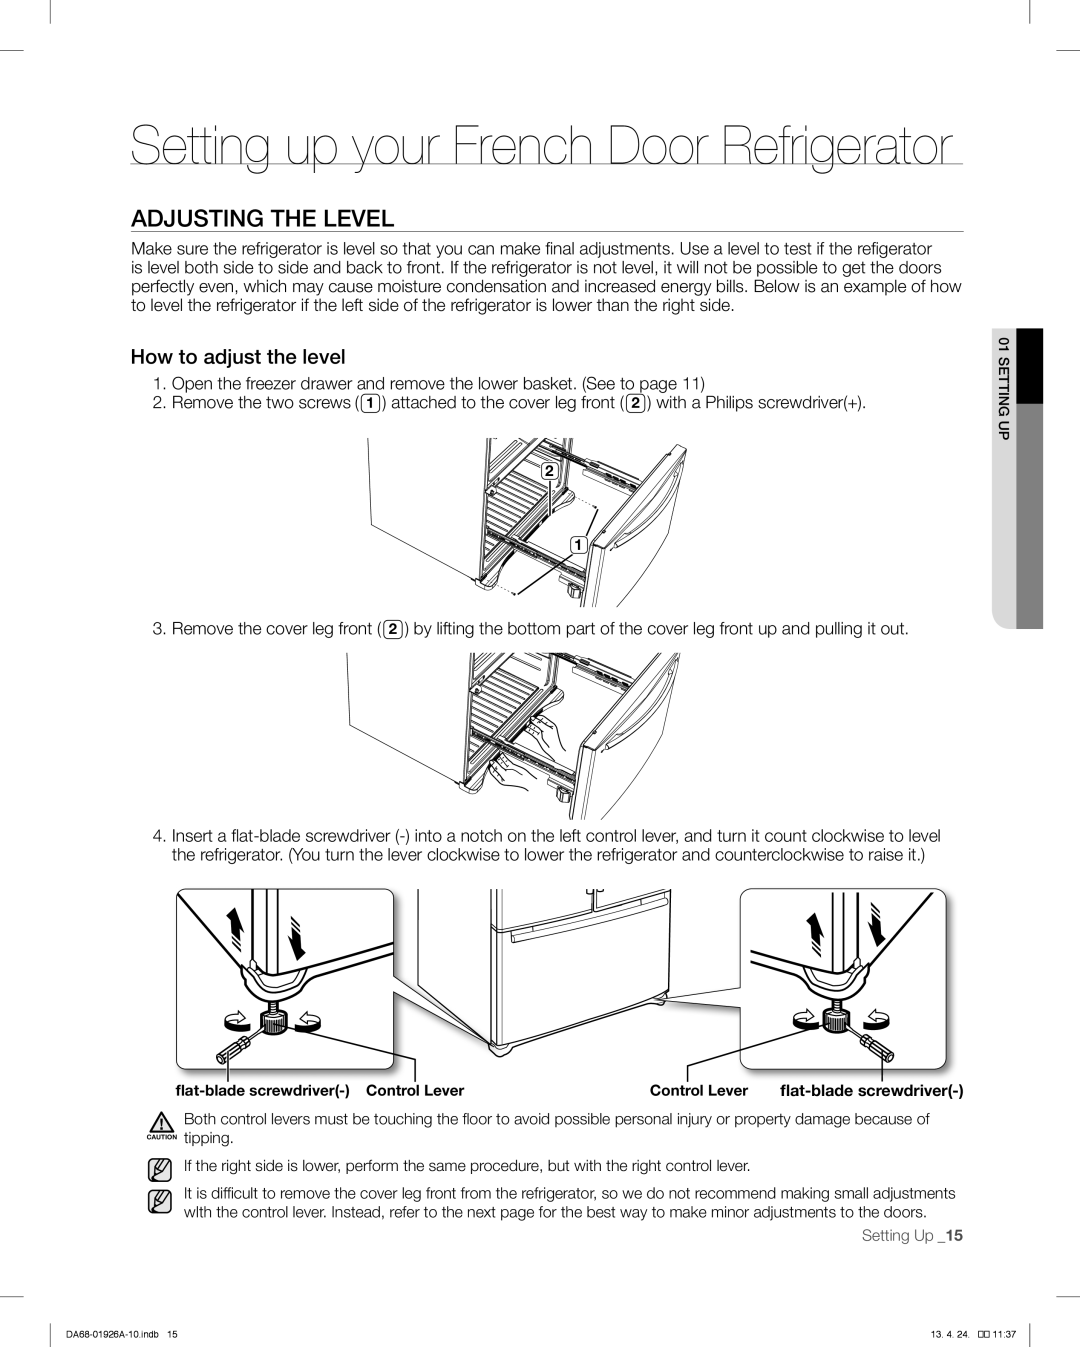 Samsung RFG293HAWP, RFG293HARS Setting up your French Door Refrigerator, Adjusting The Level, How to adjust the level 